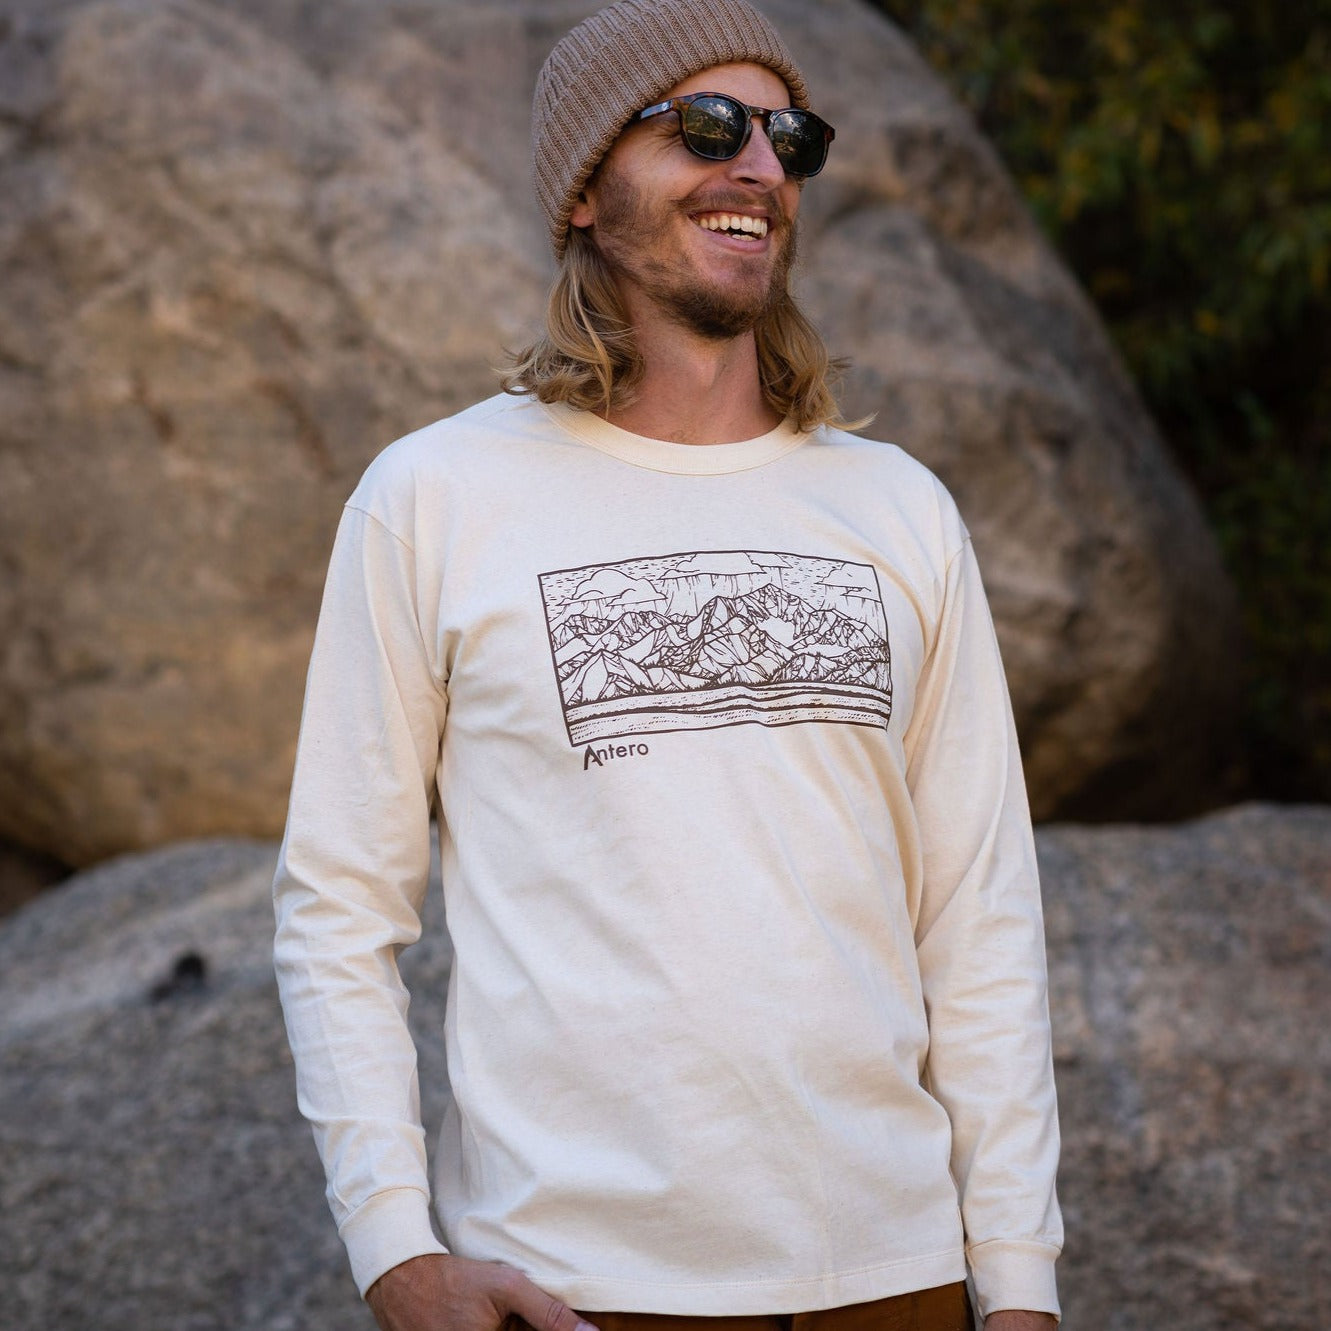 100% Organic Cotton   Color | Natural   Crew Neck  Ribbed cuff  Made in the USA  Features artwork by local Salida CO artist Brinkley Messick